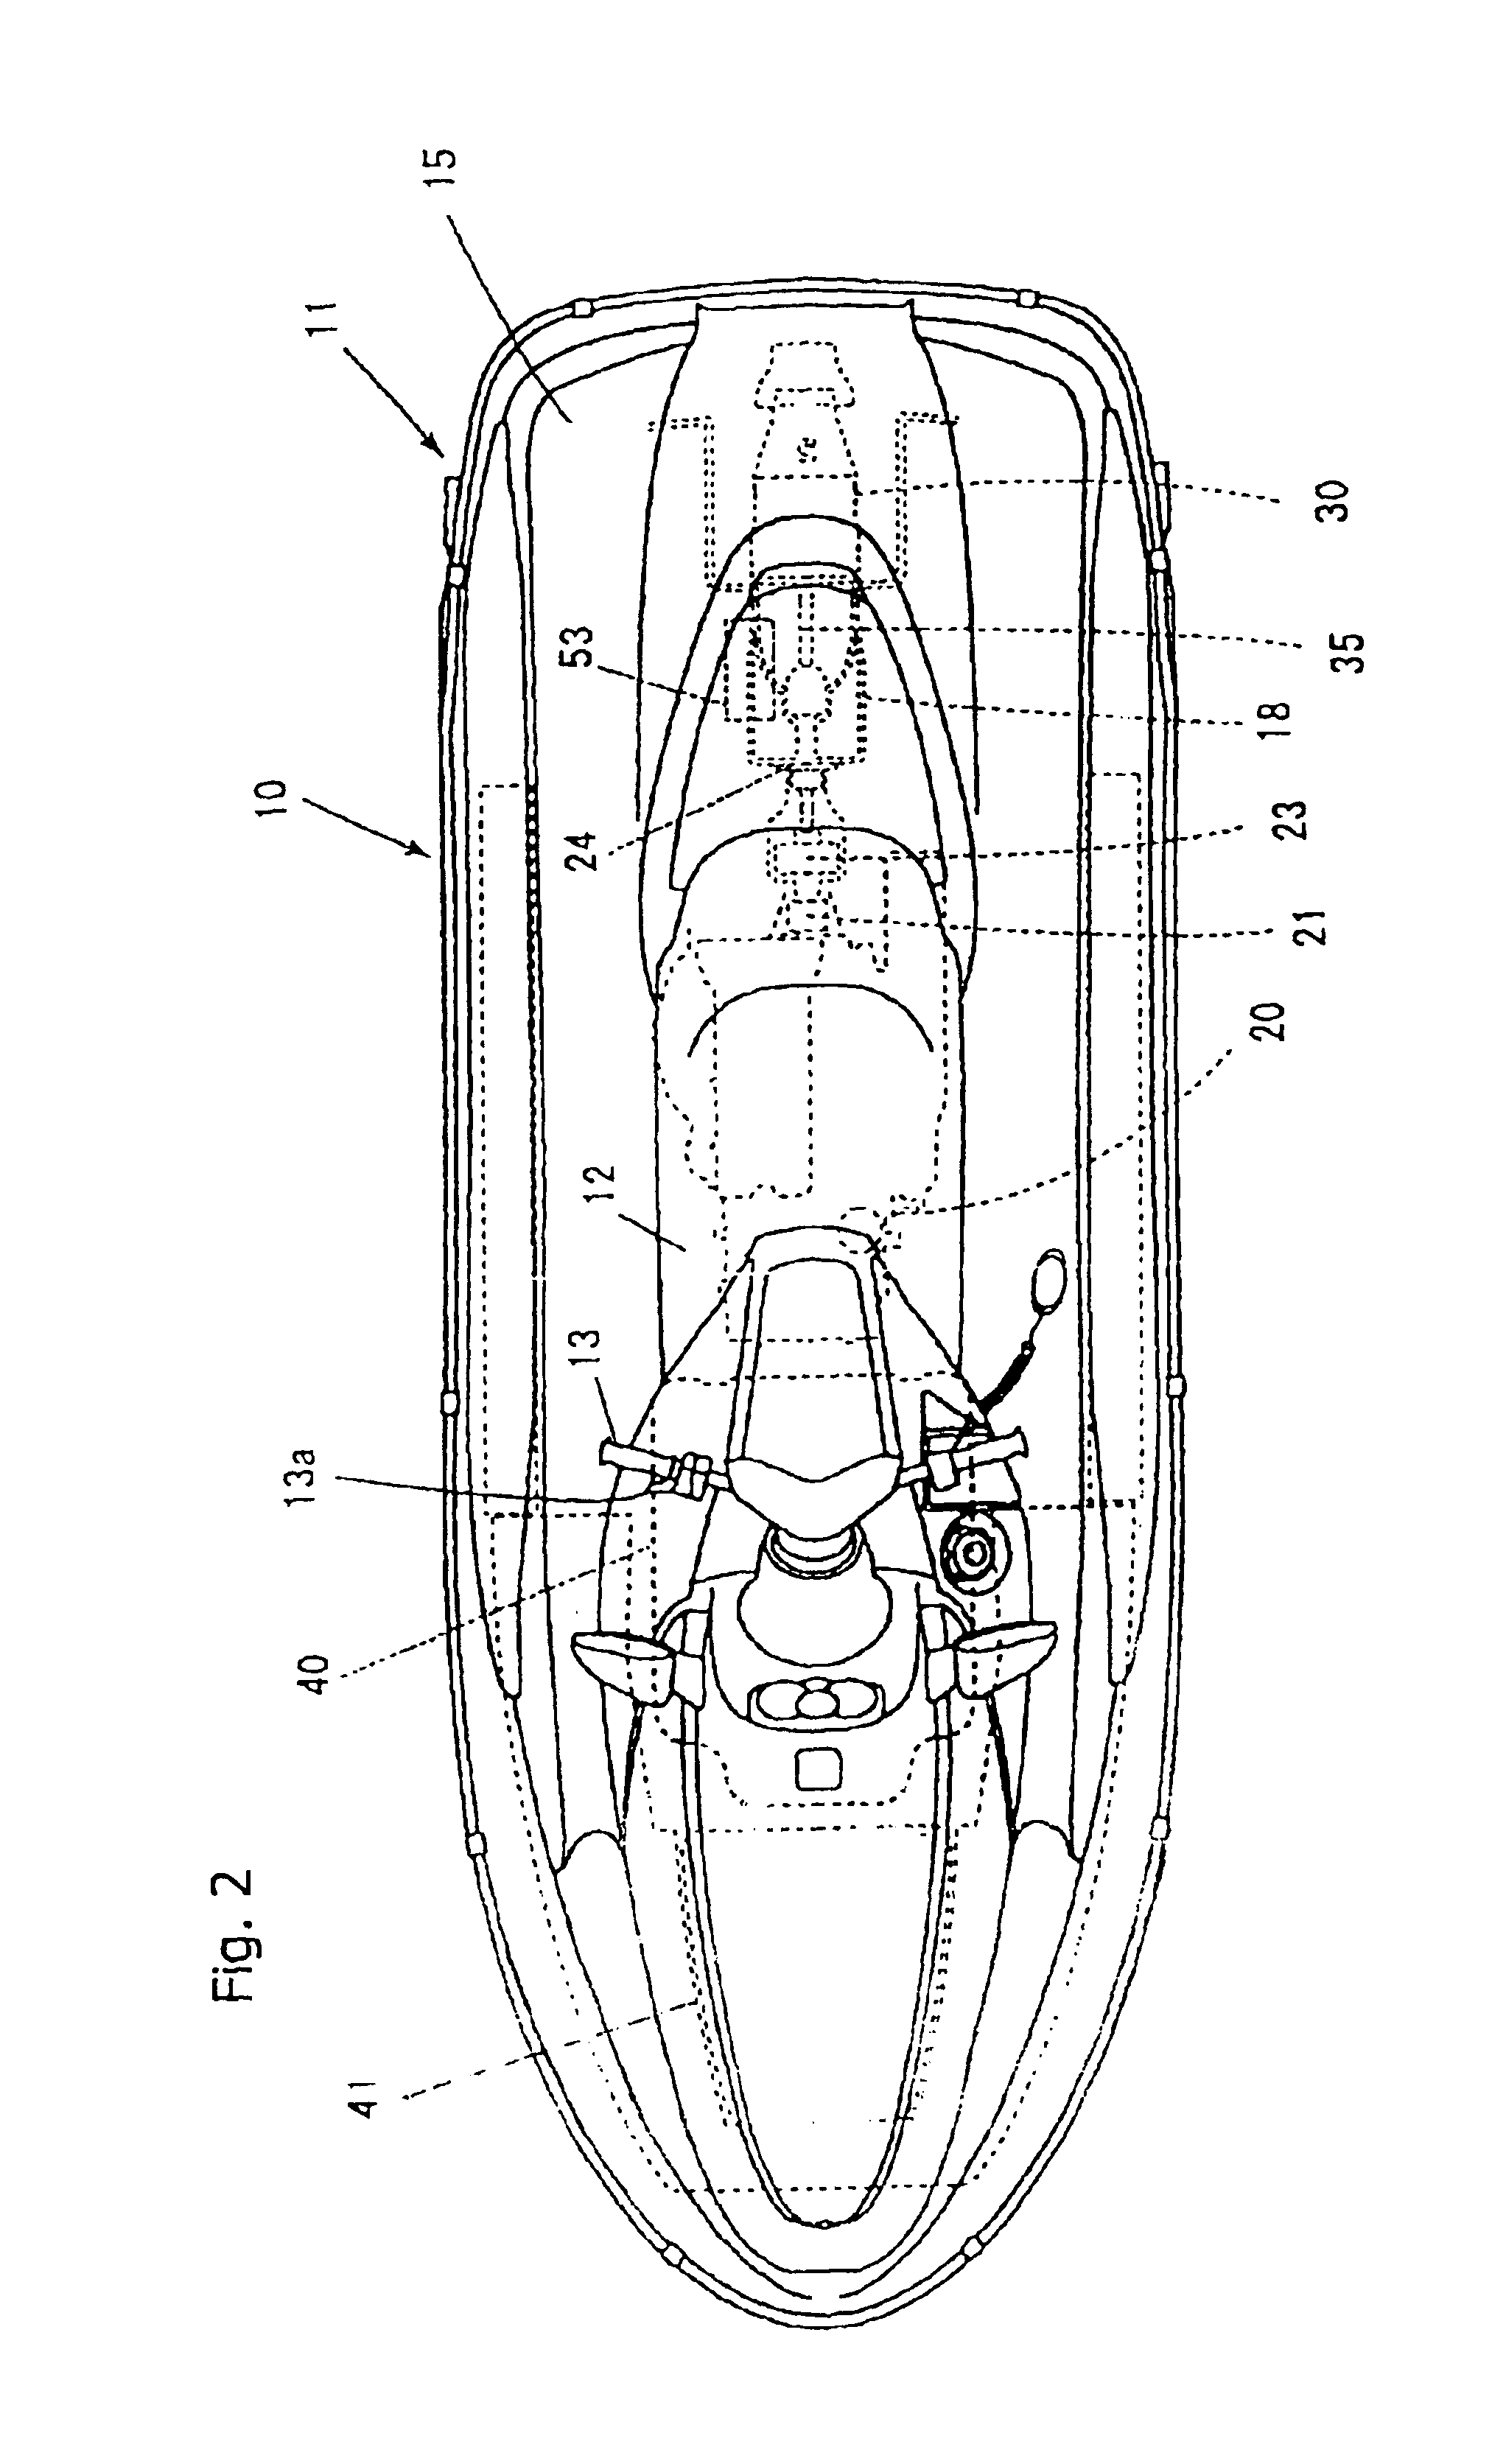 Battery mounting structure for a small watercraft, and method of using same